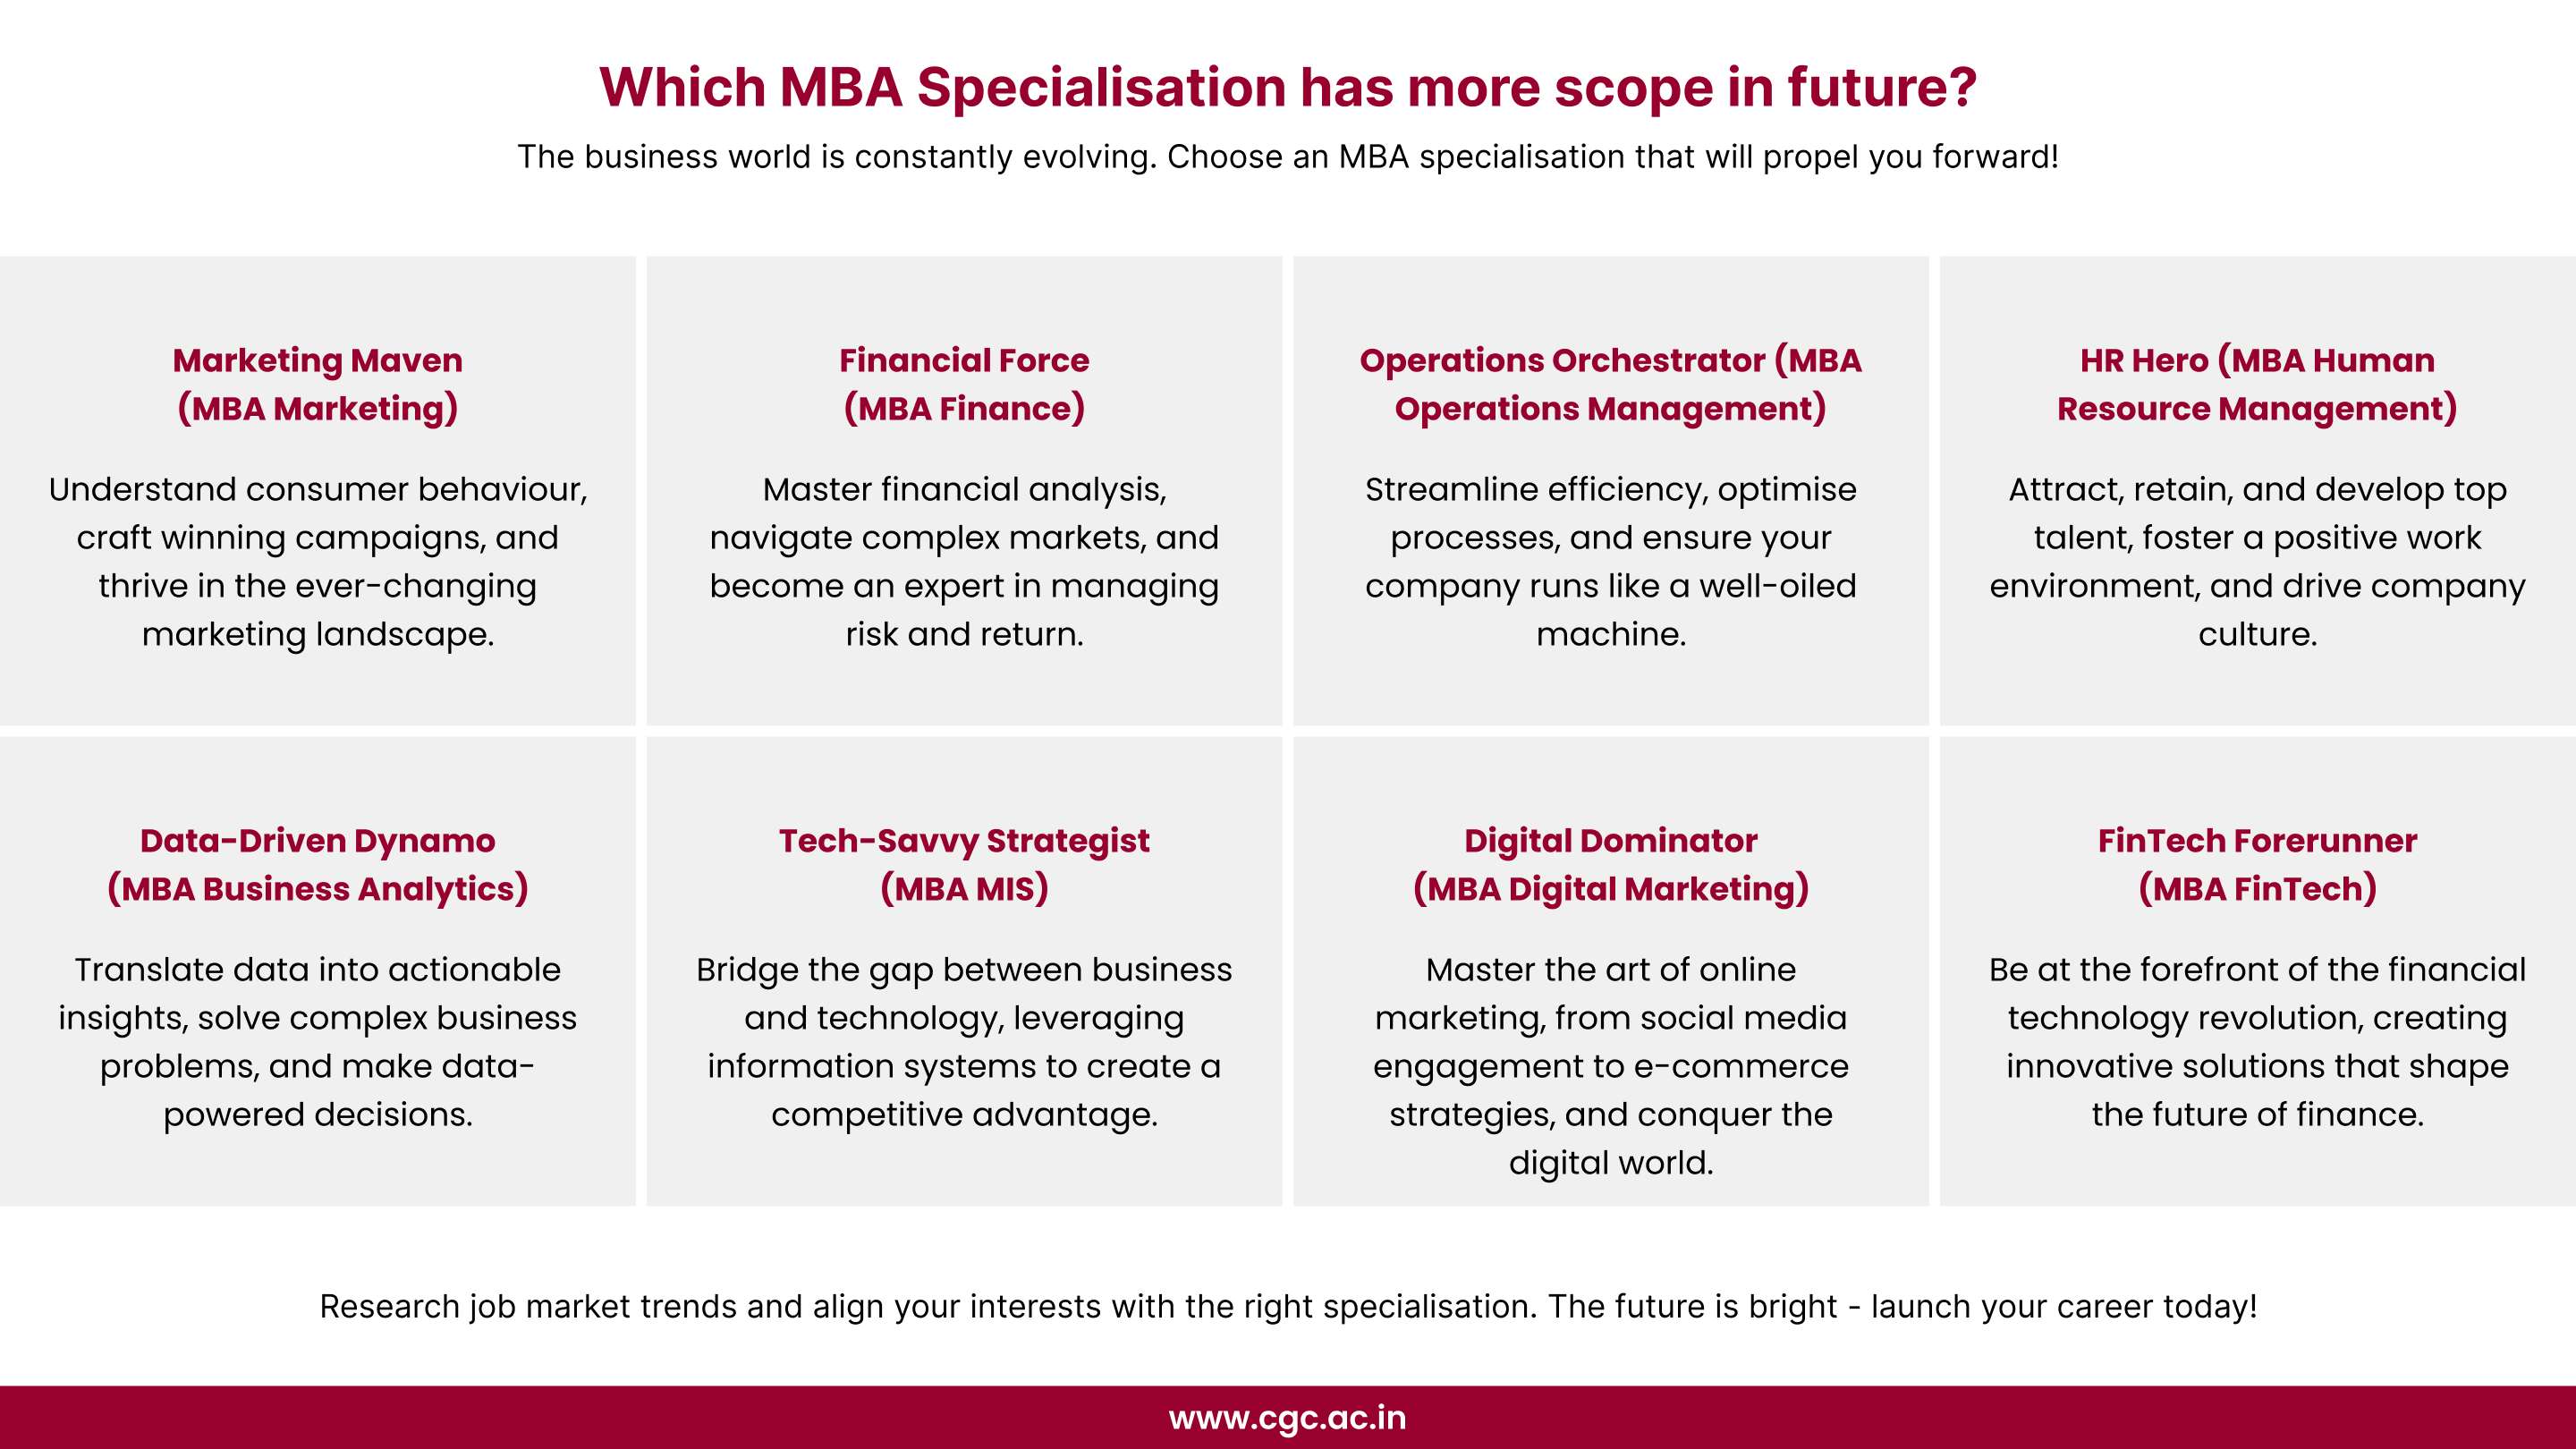 Which MBA Specialisation Has More Scope in Future?